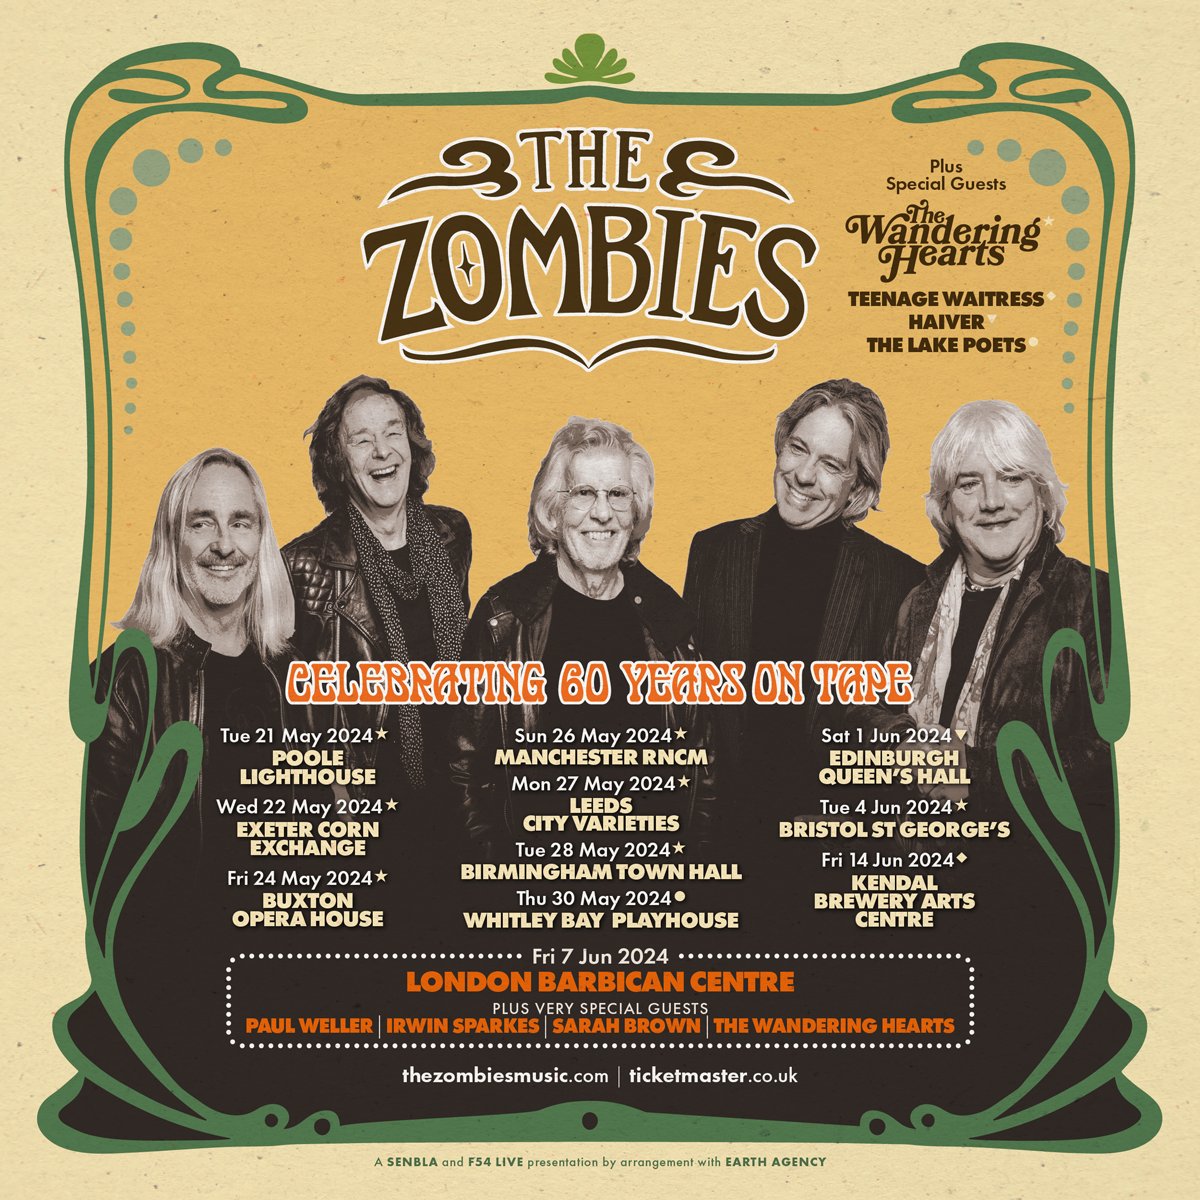 We are thrilled to announce our Special Guests for the upcoming UK Tour! The Wandering Hearts, HAIVER, Teenage Waitress and The Lake Poets will be joining us this May & June to rock it! More information at thezombiesmusic.com/tour!